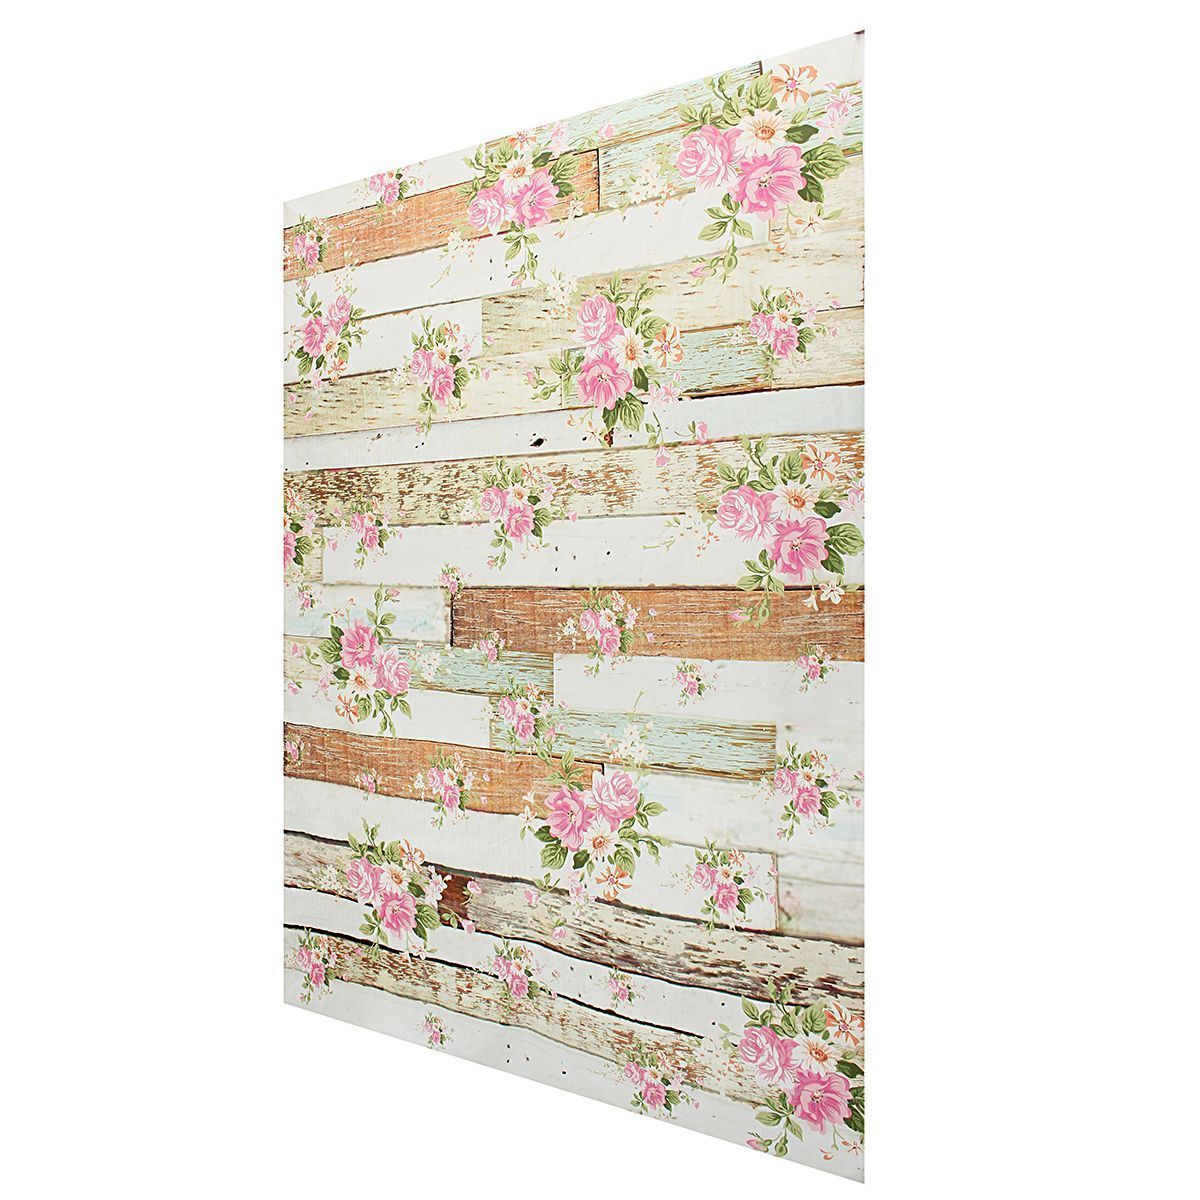 5x7FT-Vintage-Pink-Flowers-Wooden-Floor-Wall-Photo-Studio-Background-Backdrop-Cloth-1116099